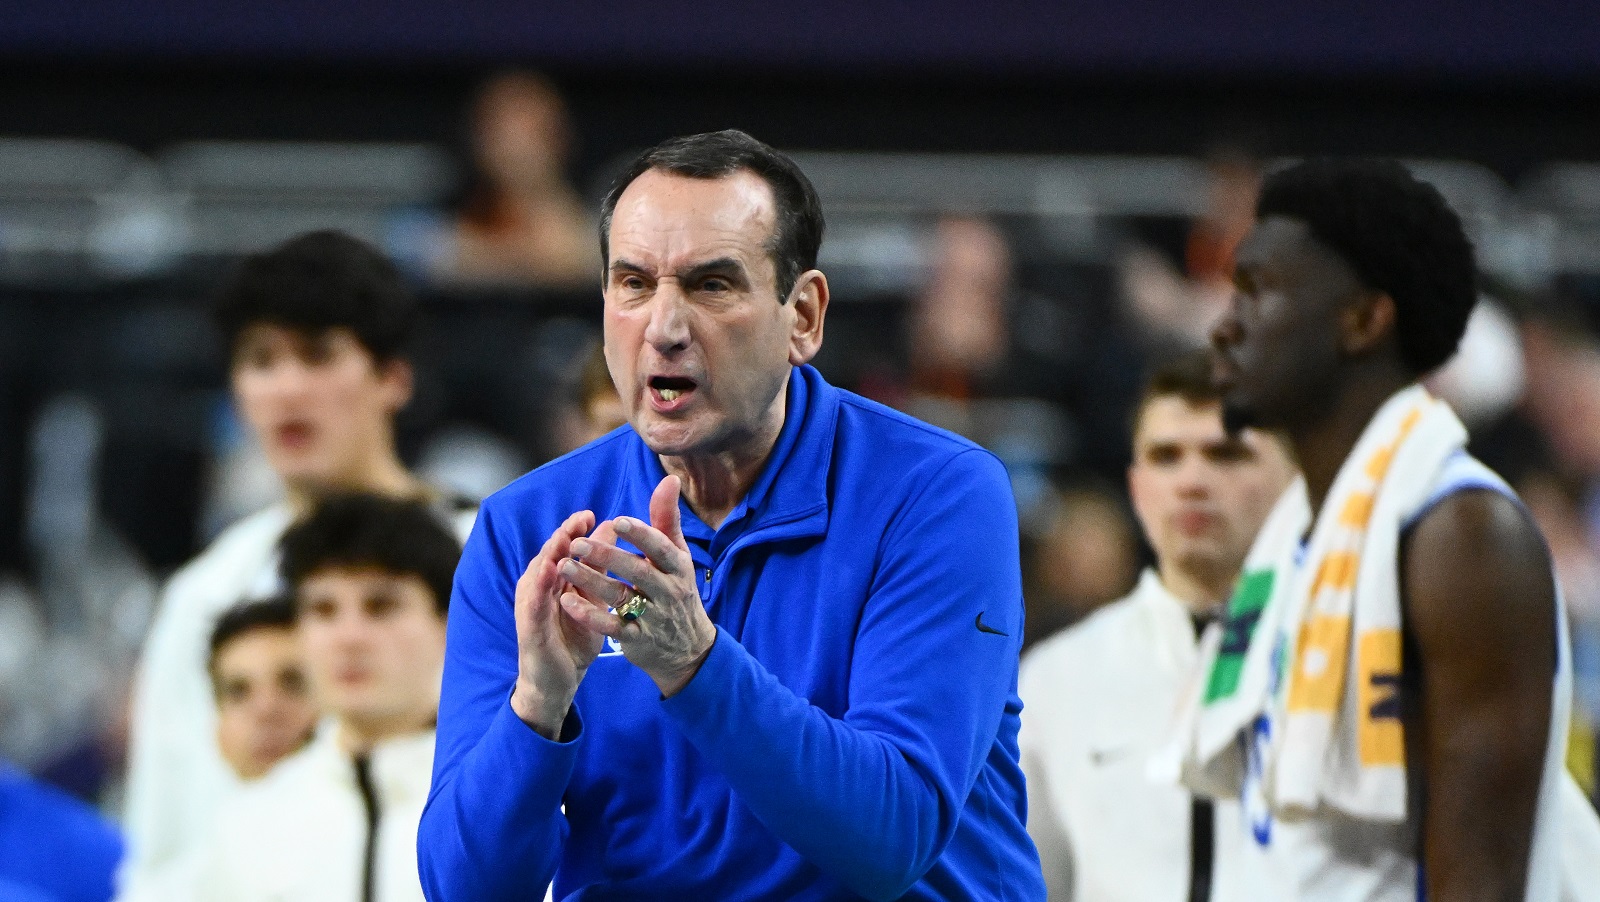 Mike Krzyzewski of the Duke Blue Devils cheers on his team as they take on the North Carolina Tar Heels in the semifinal game of the 2022 NCAA Men's Basketball Tournament Final Four on April 2, 2022, in New Orleans. | Brett Wilhelm/NCAA Photos via Getty Images